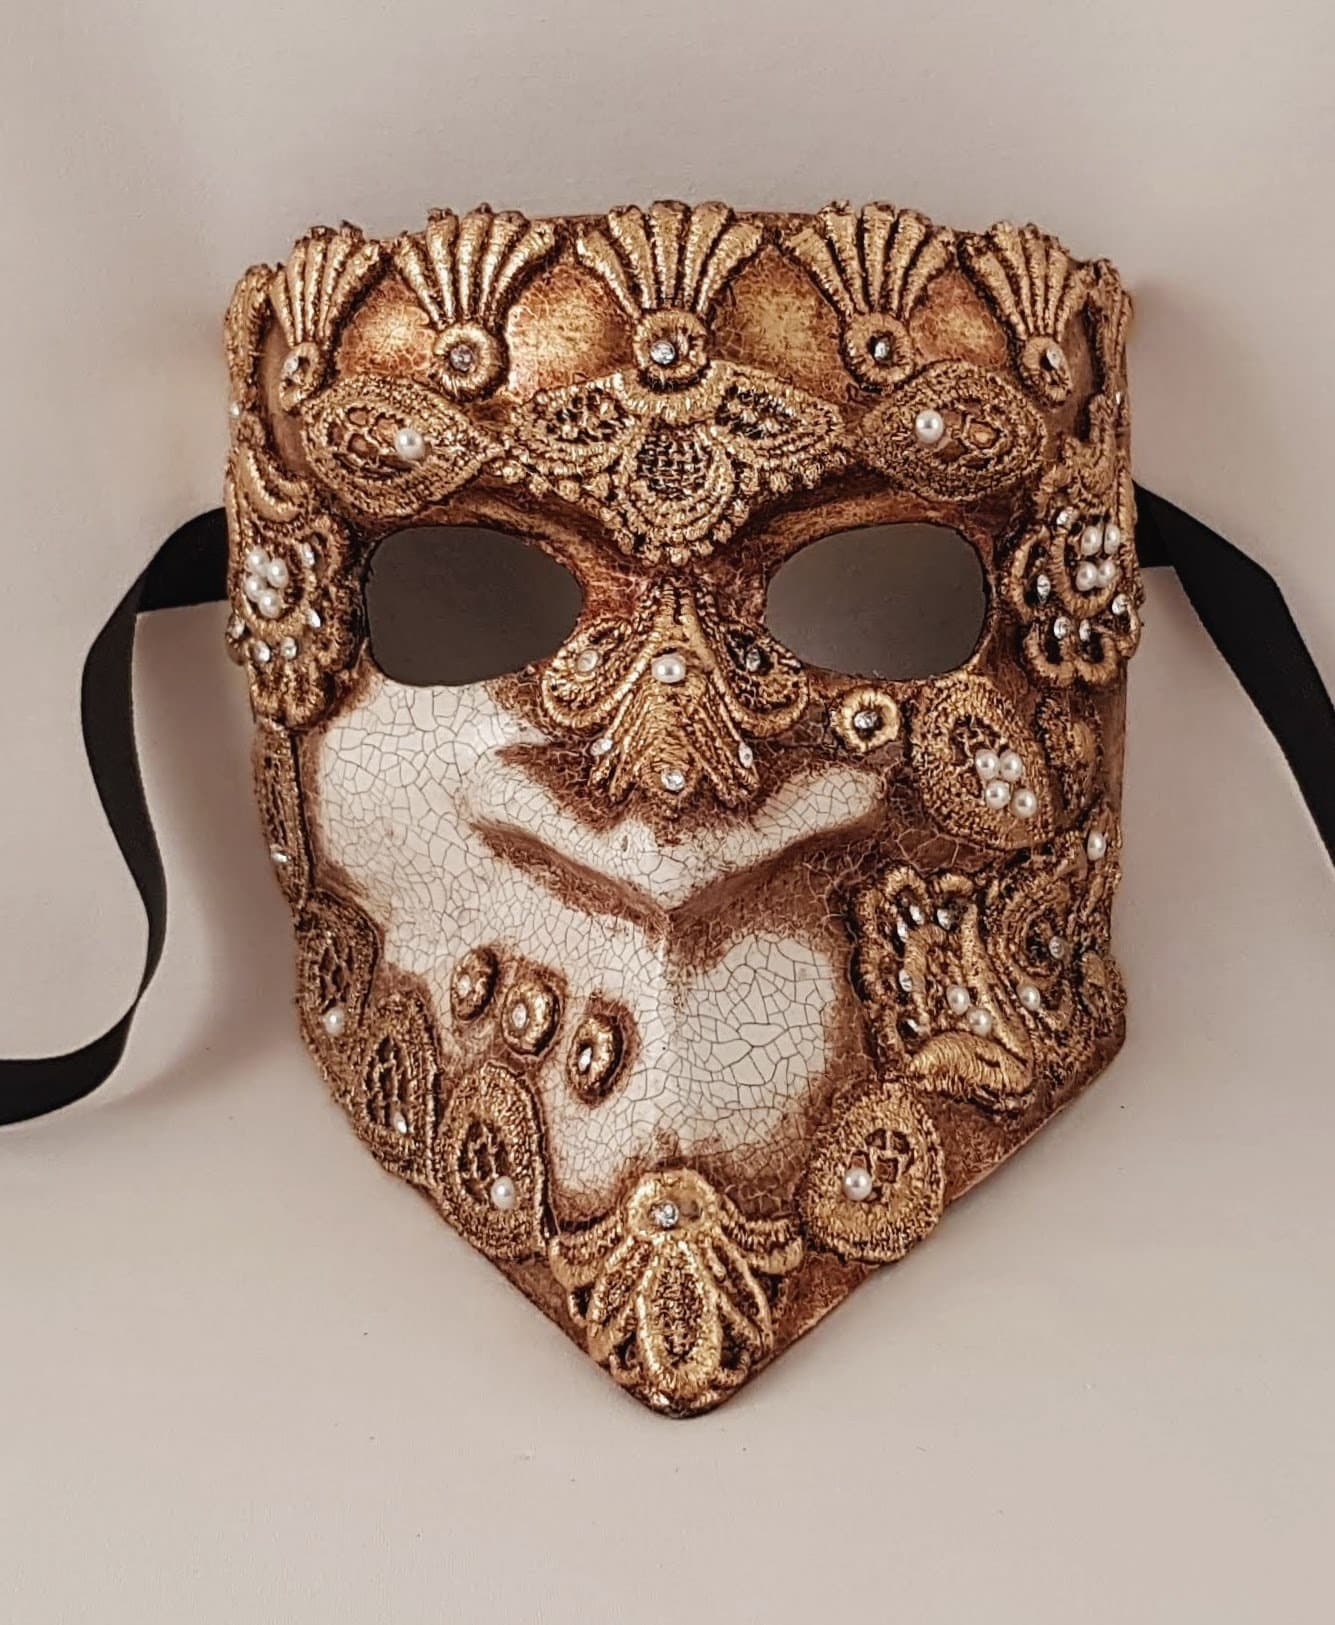 Bauta venetian masks hand made in Italy on gold macramè for the carnival and special events